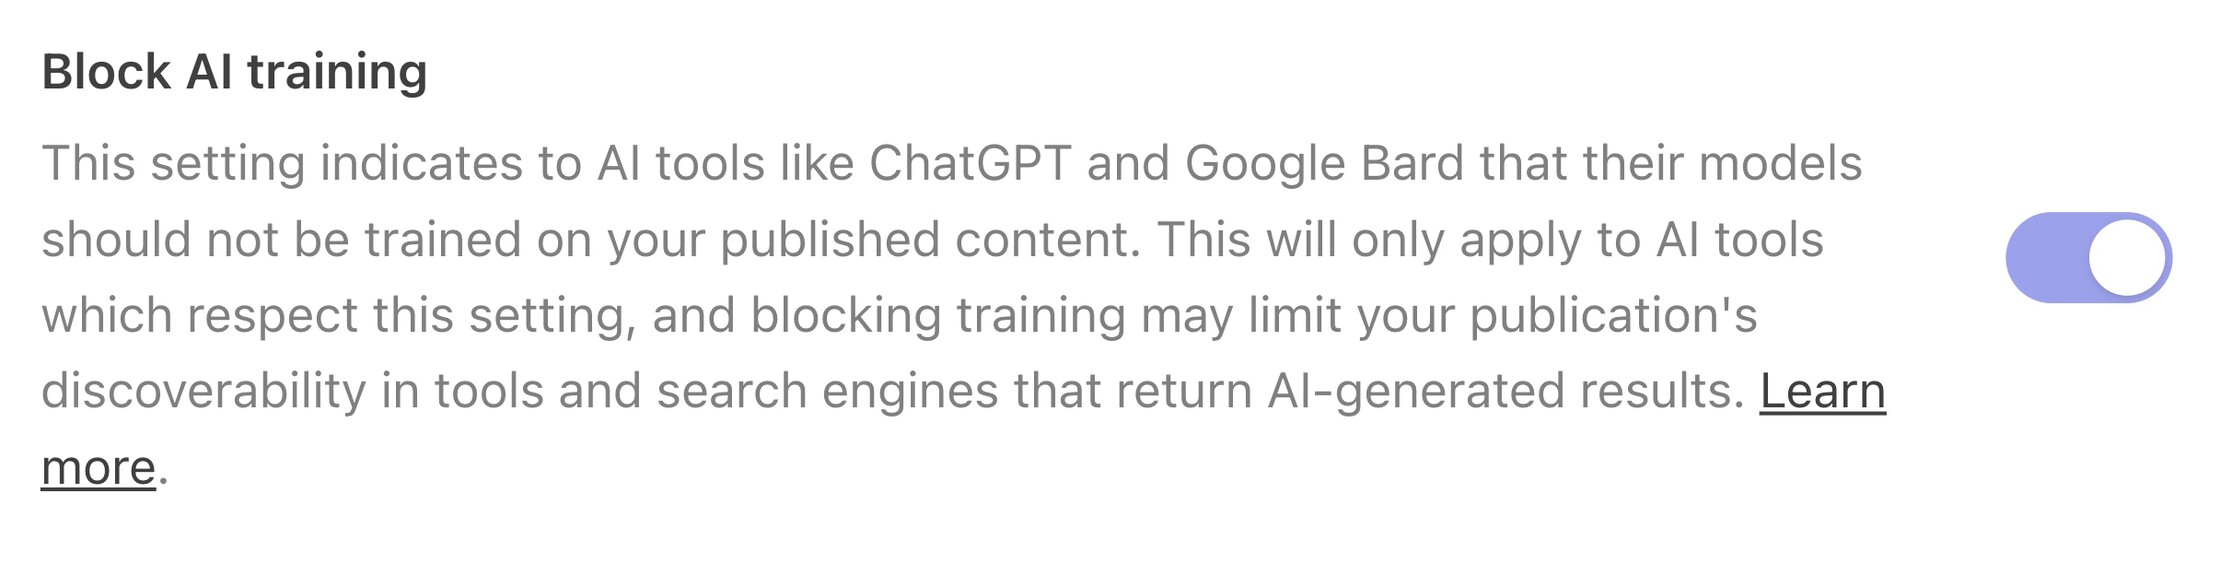 A screenshot of a setting from Substack's writer dashboard reading: Block AI training This setting indicates to AI tools like ChatGPT and Google Bard that their models should not be trained on your published content. This will only apply to AI tools which respect this setting, and blocking training may limit your publication's discoverability in tools and search engines that return AI-generated results.